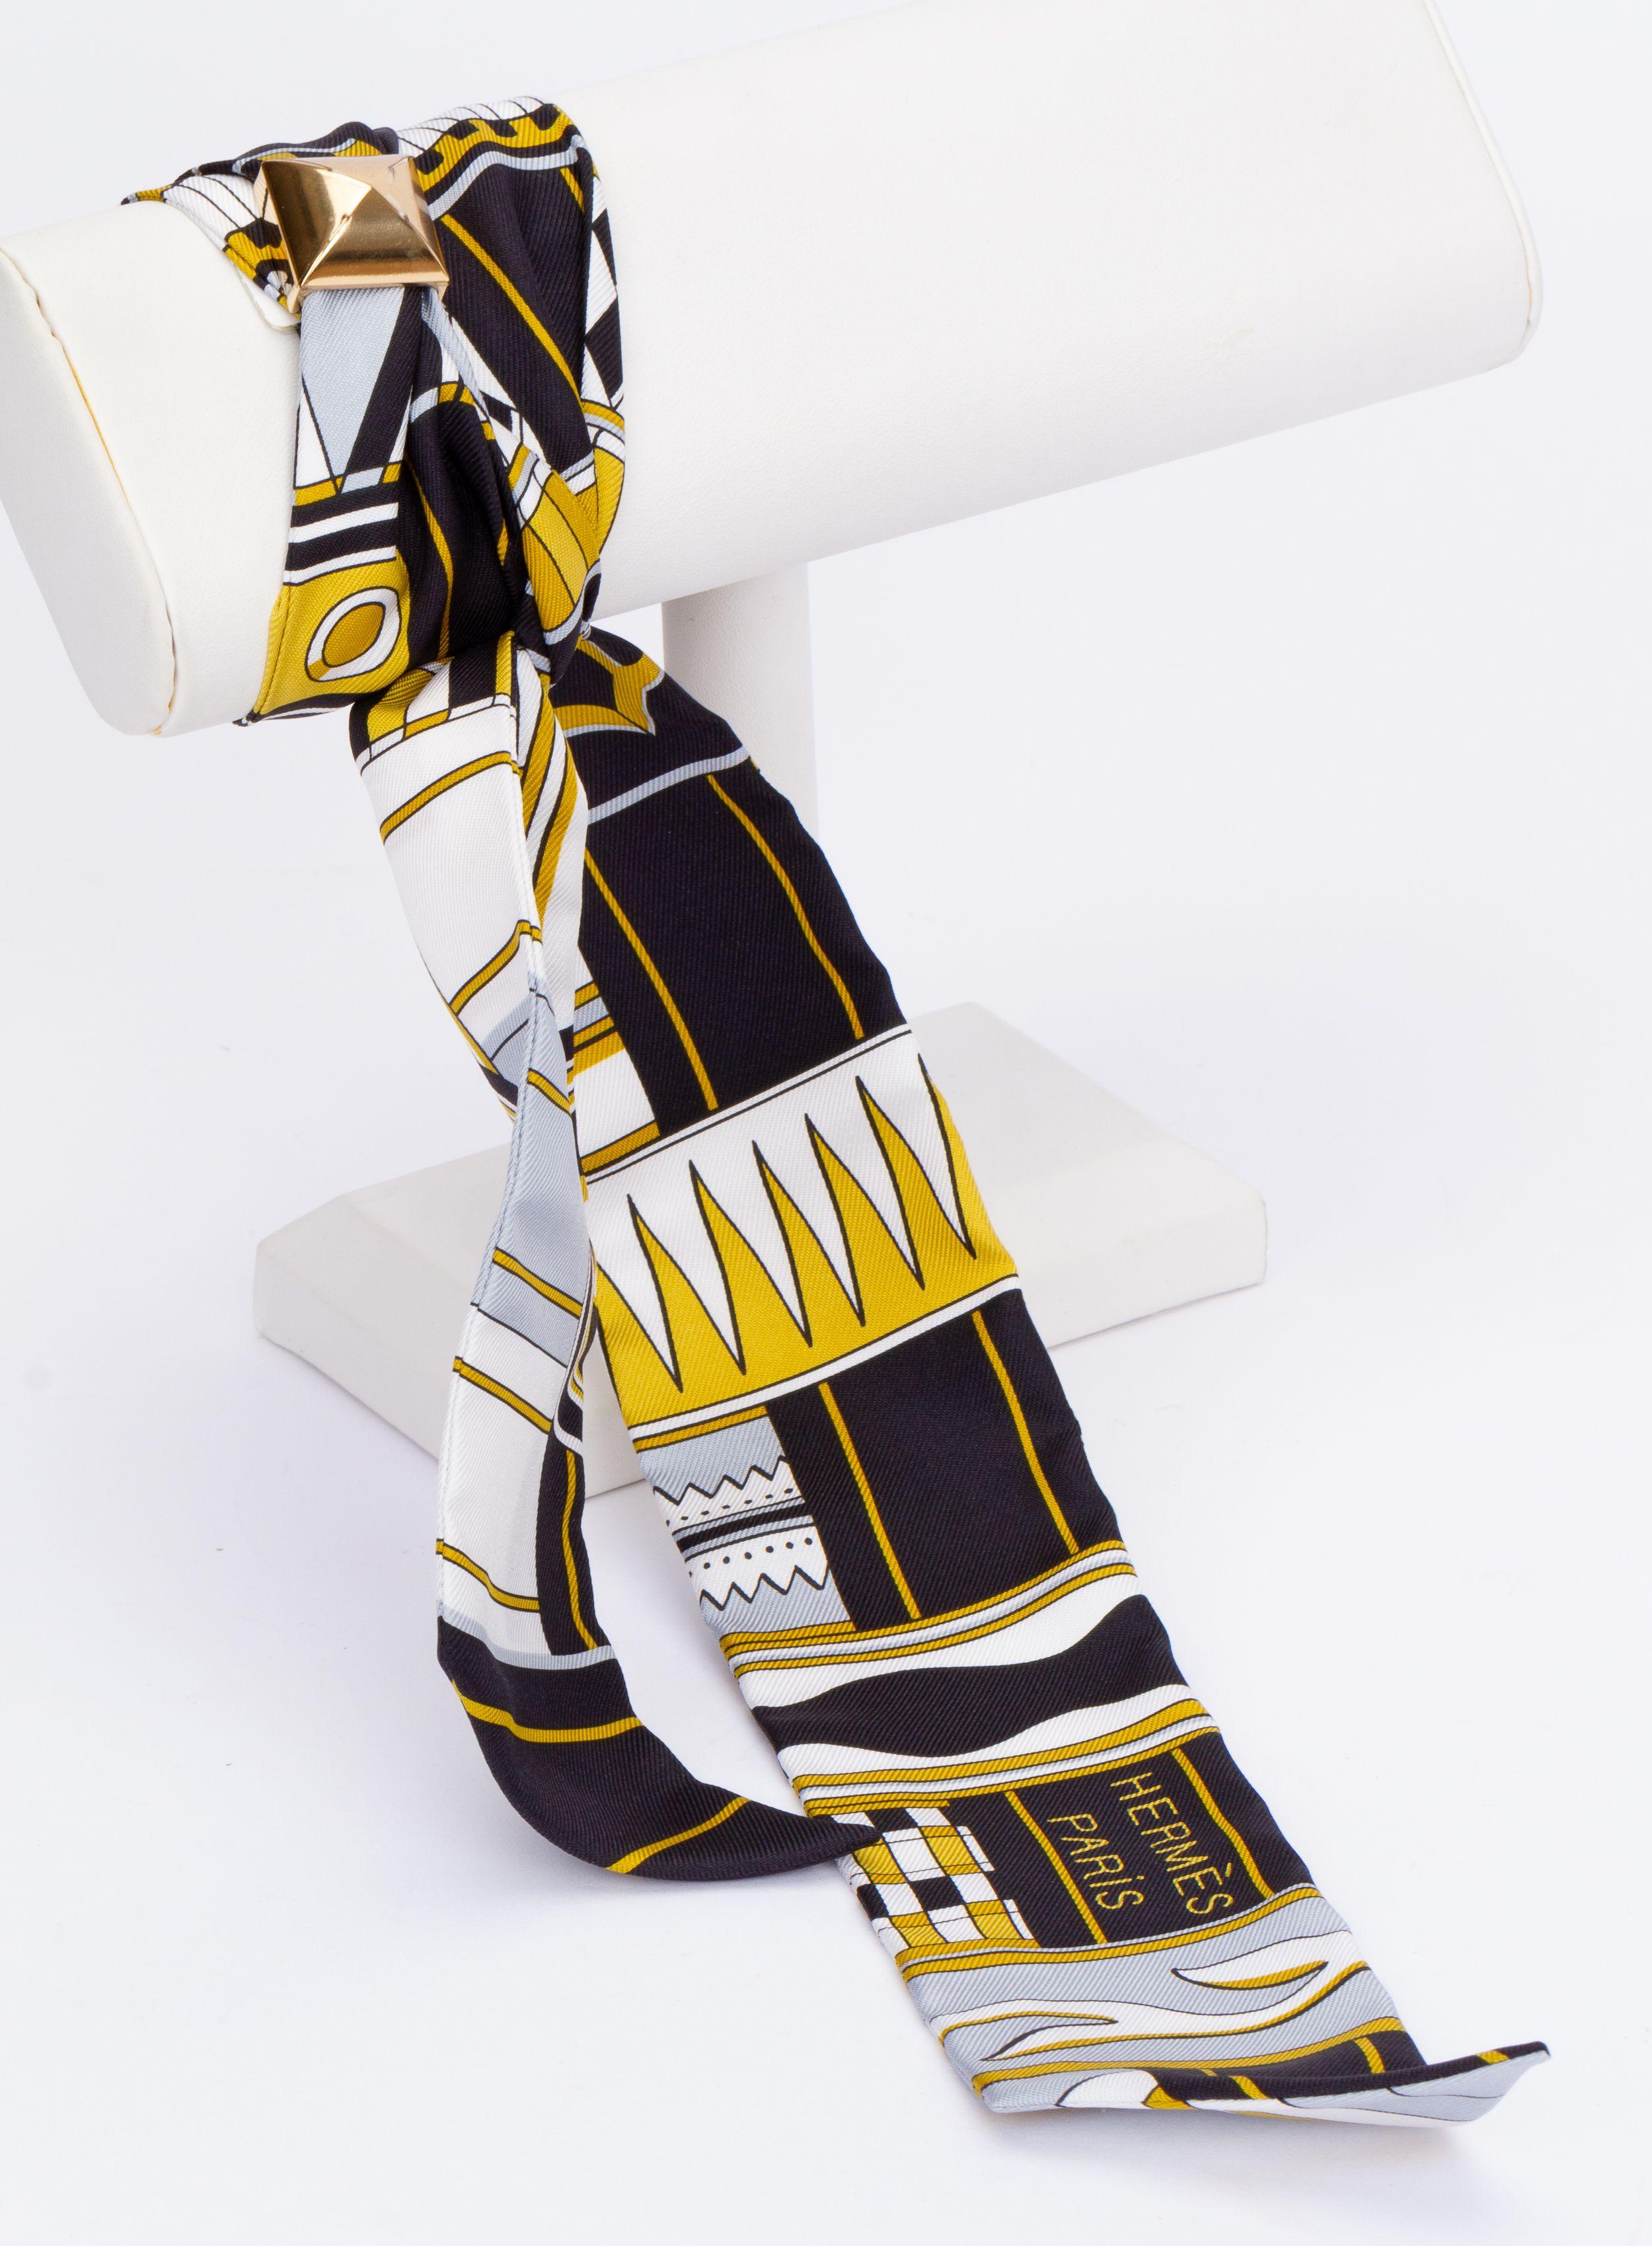 New Hermès Geometric Twilly. The scarf is made out of silk and the main color is yellow. The print shows different geometrical figures. It is brand new and comes with a scarf ring. It is packend in the original box and wrapped with the traditional